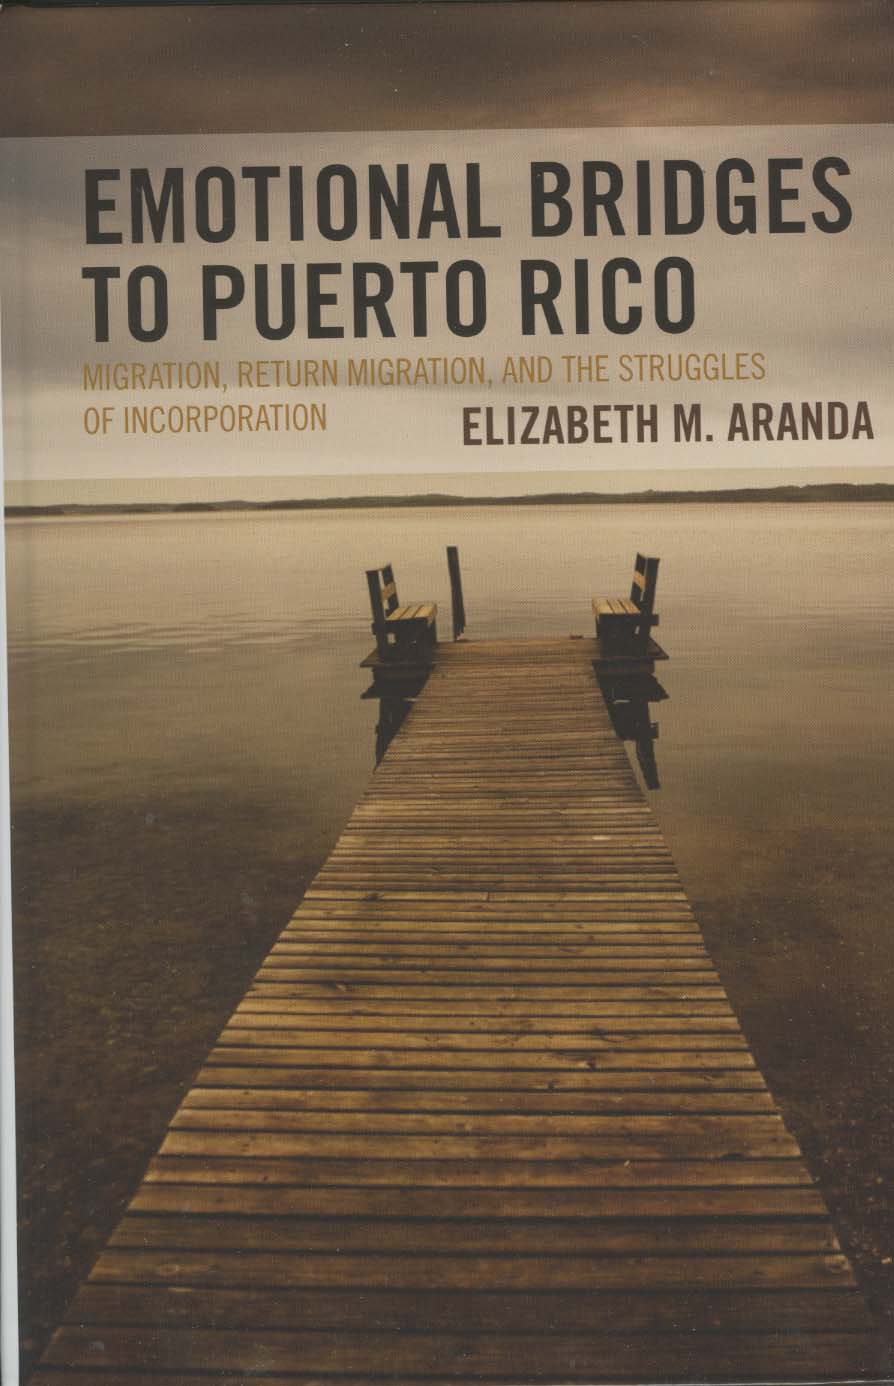 Emotional Bridges to Puerto Rico: Migration, Return Migration, and the Struggles of Incorporation